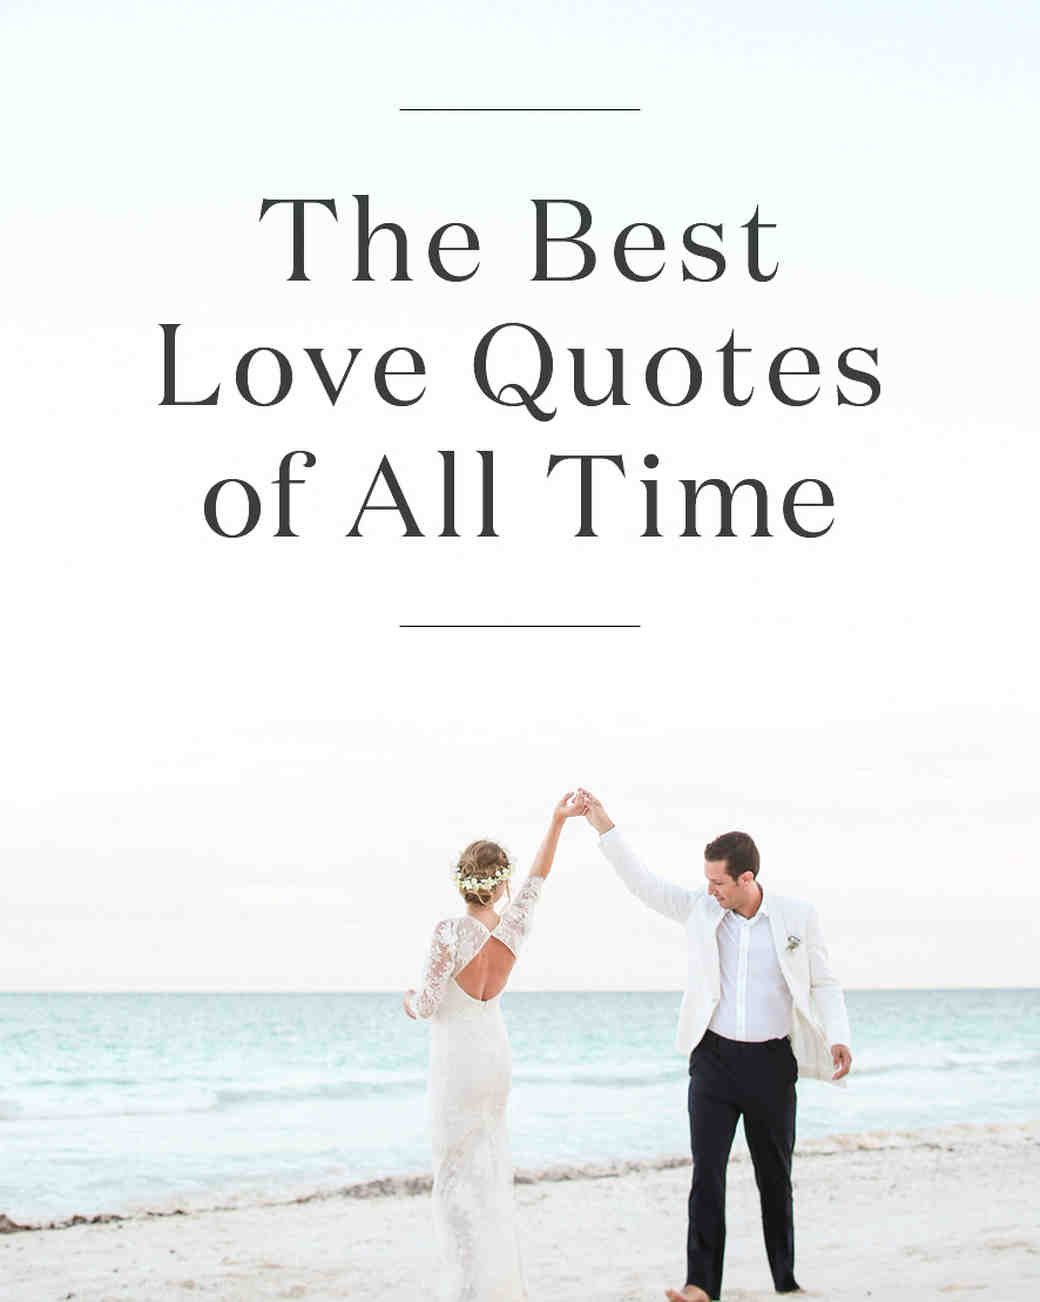 The Best Relationship Quotes
 The 20 Best Love Quotes of All Time